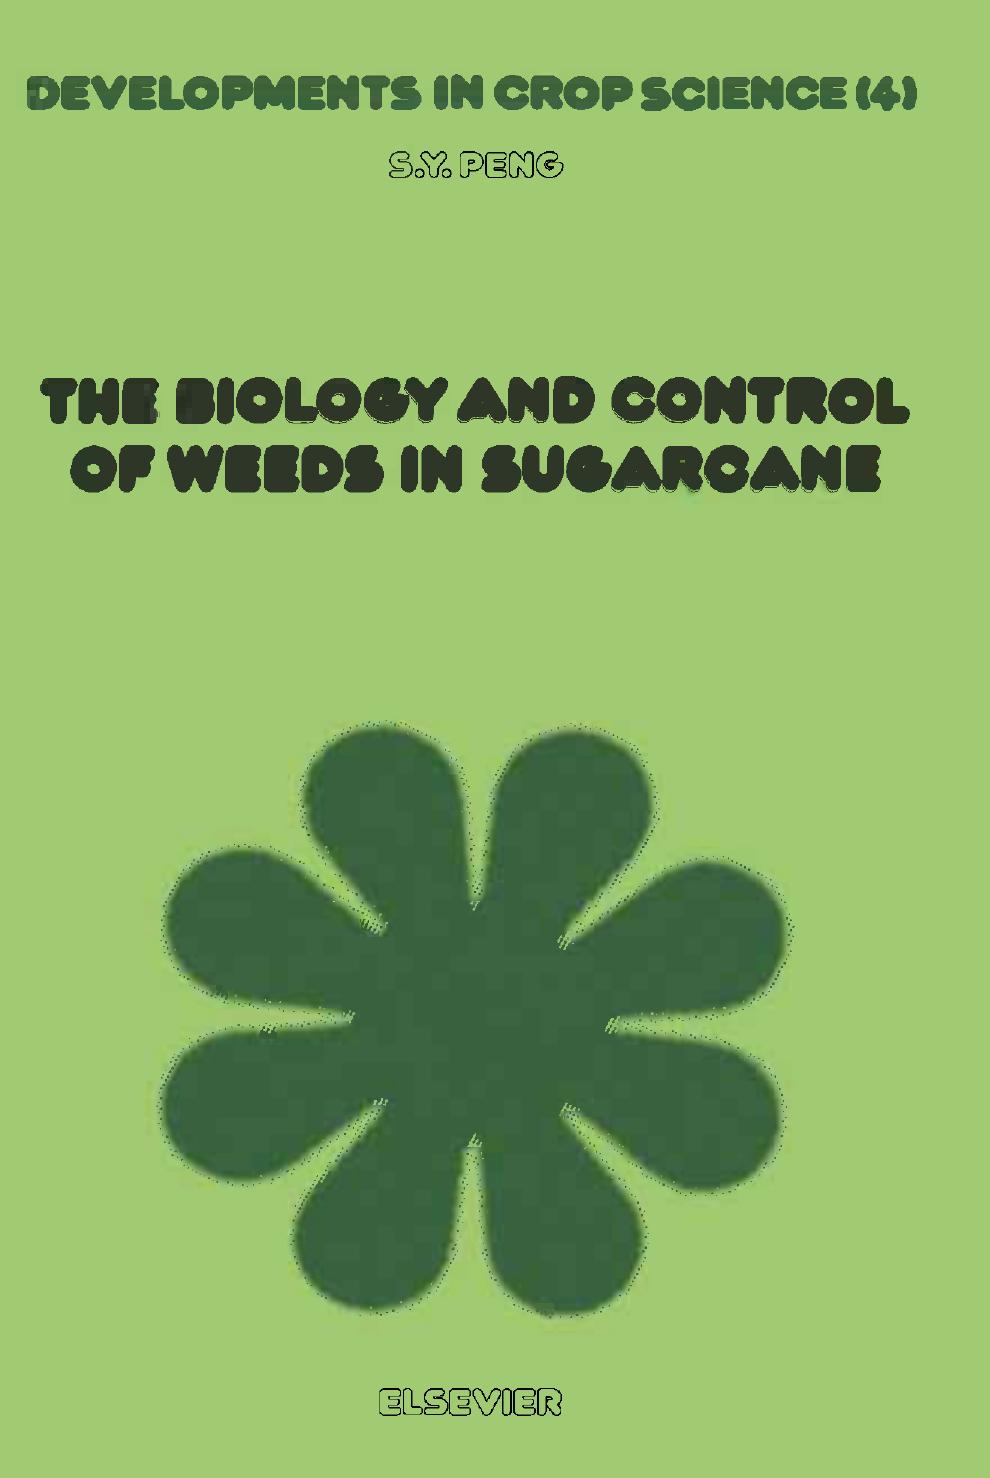 The Biology And Control of Weeds in Sugarcane